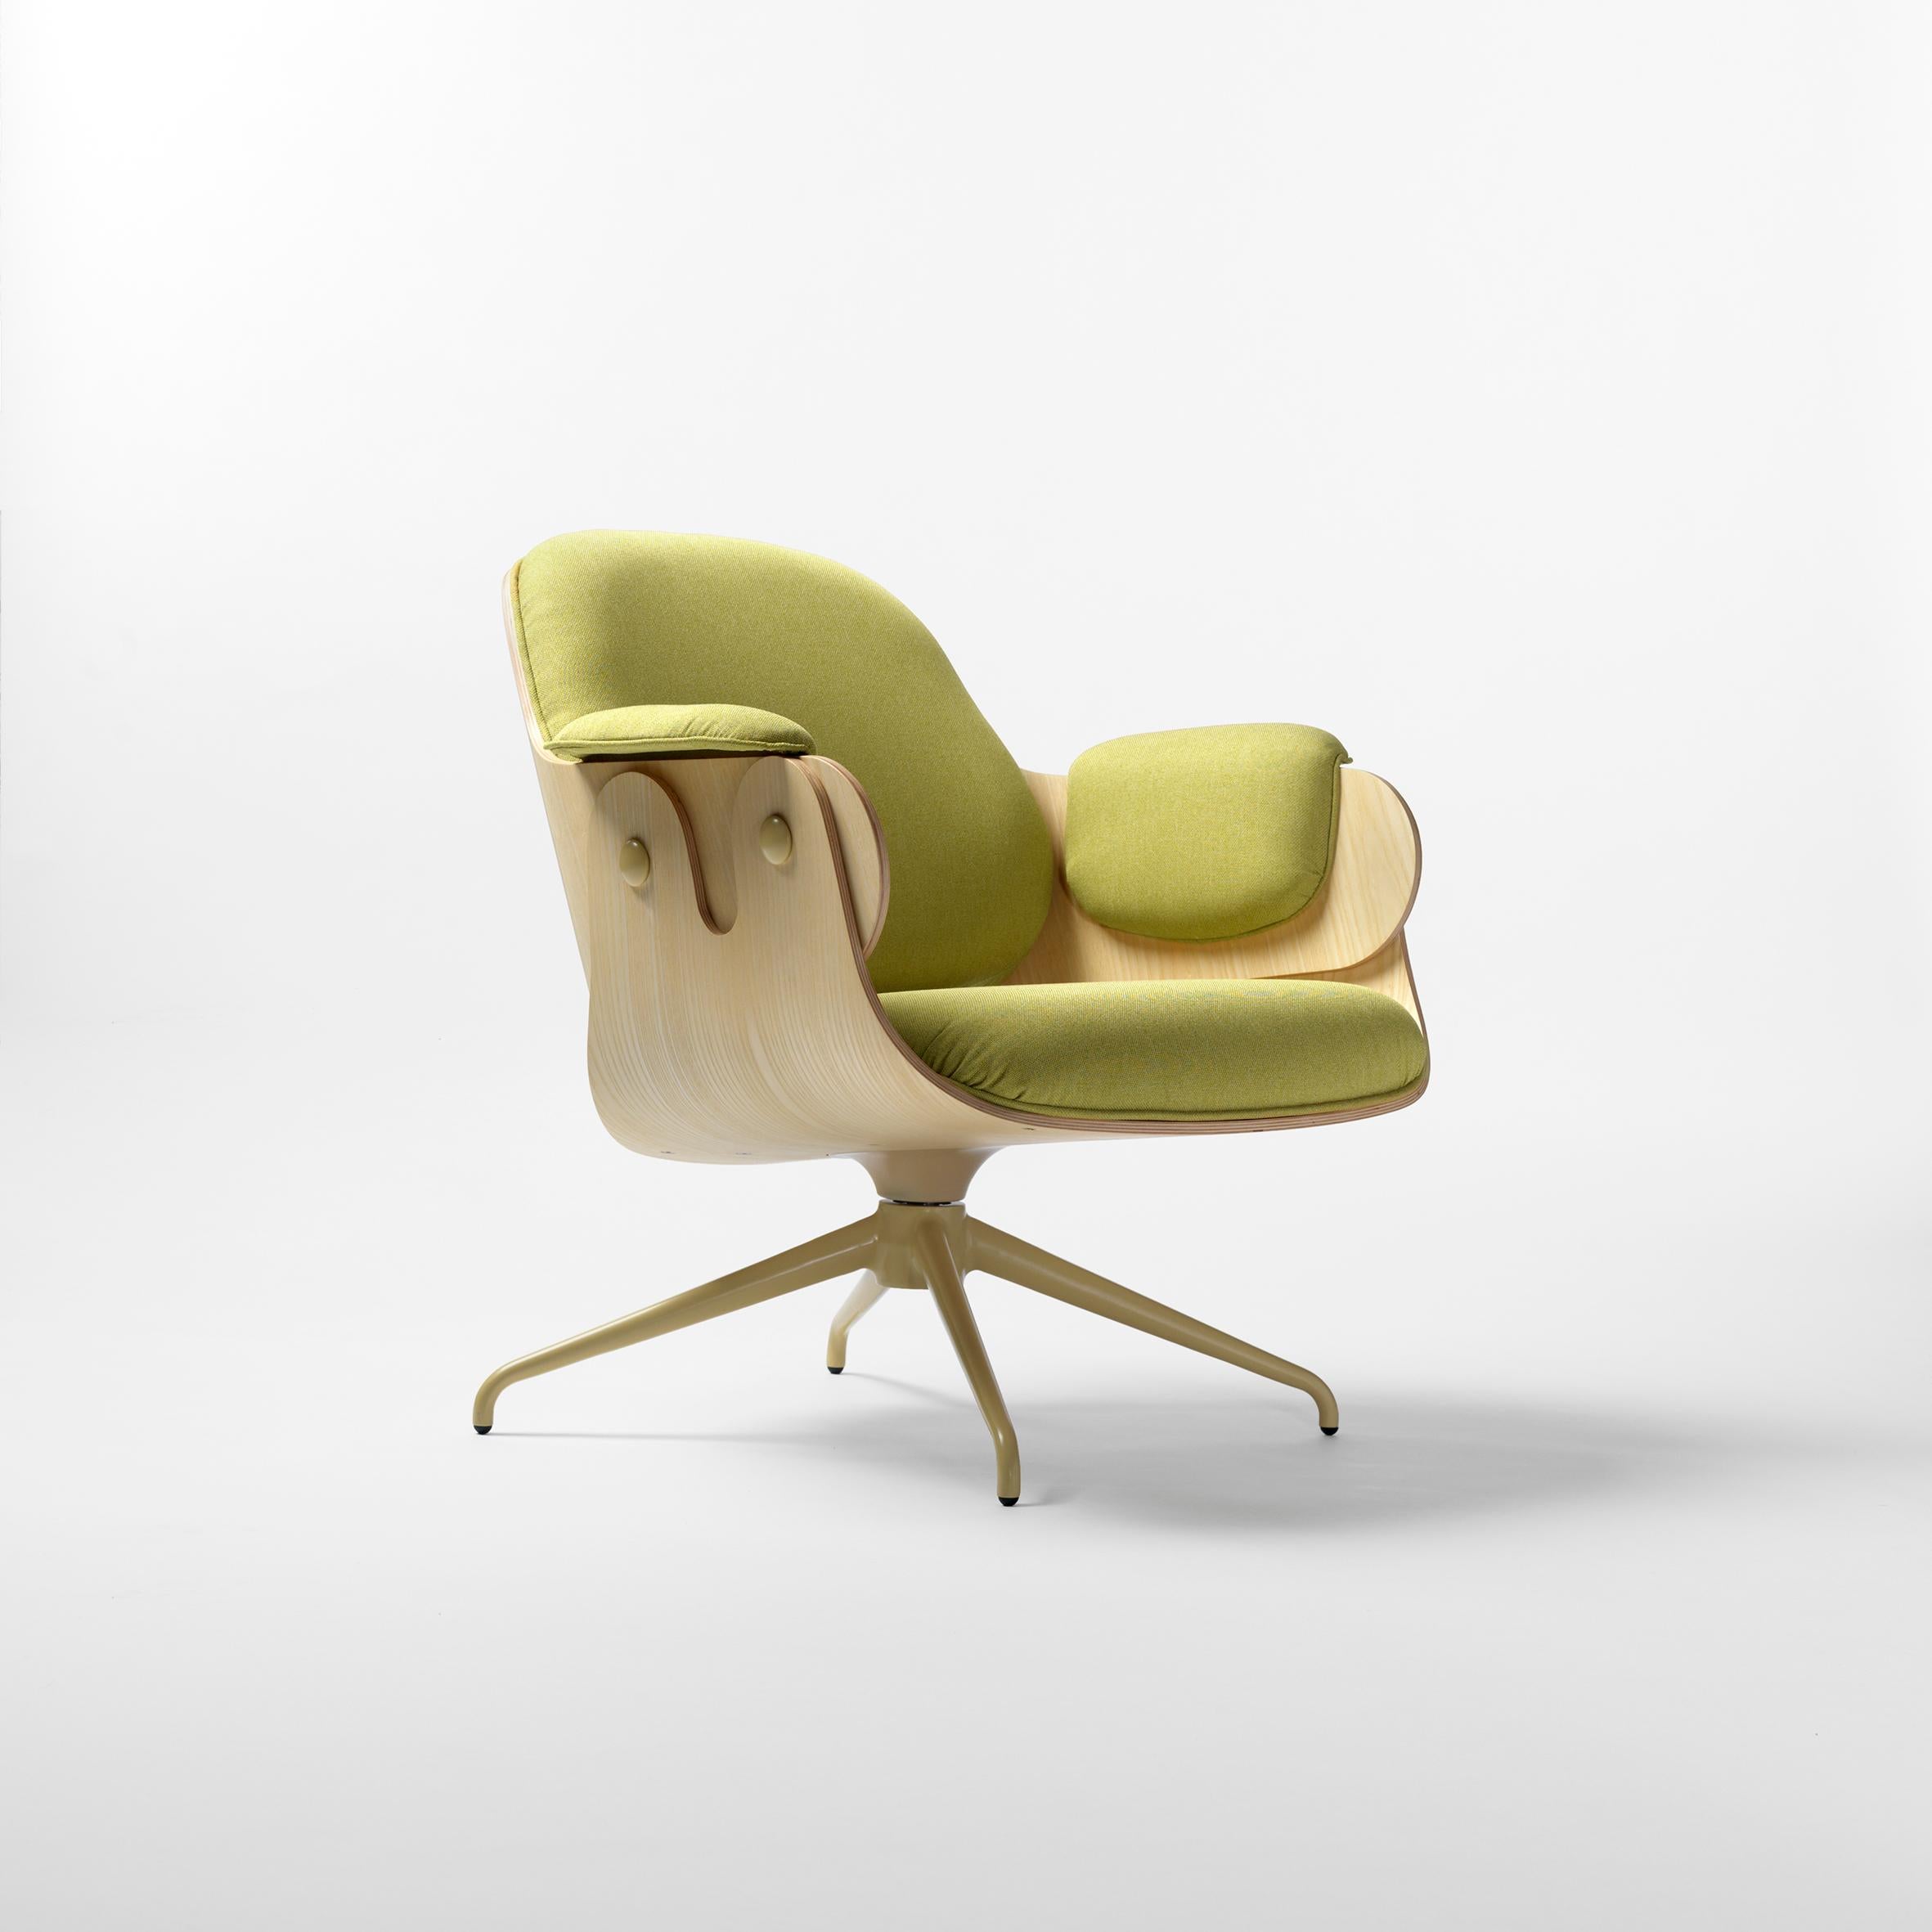 Jaime Hayon, Contemporary, Ash, Pistachio Upholstery Low Lounger Armchair In New Condition For Sale In Barcelona, Barcelona